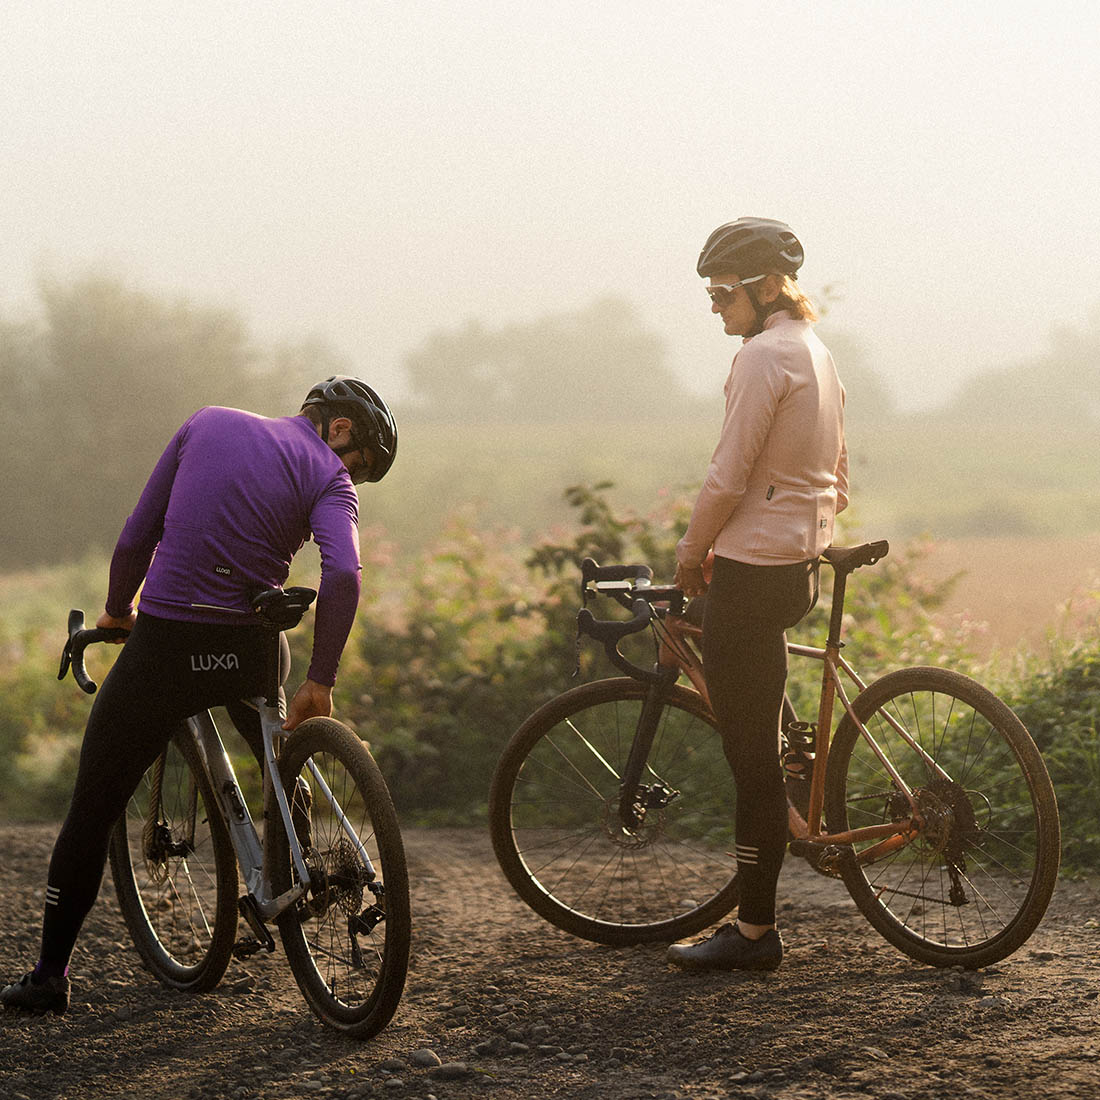 Warm and fleece-lined Luxa cycling jerseys for autumn and gravel.